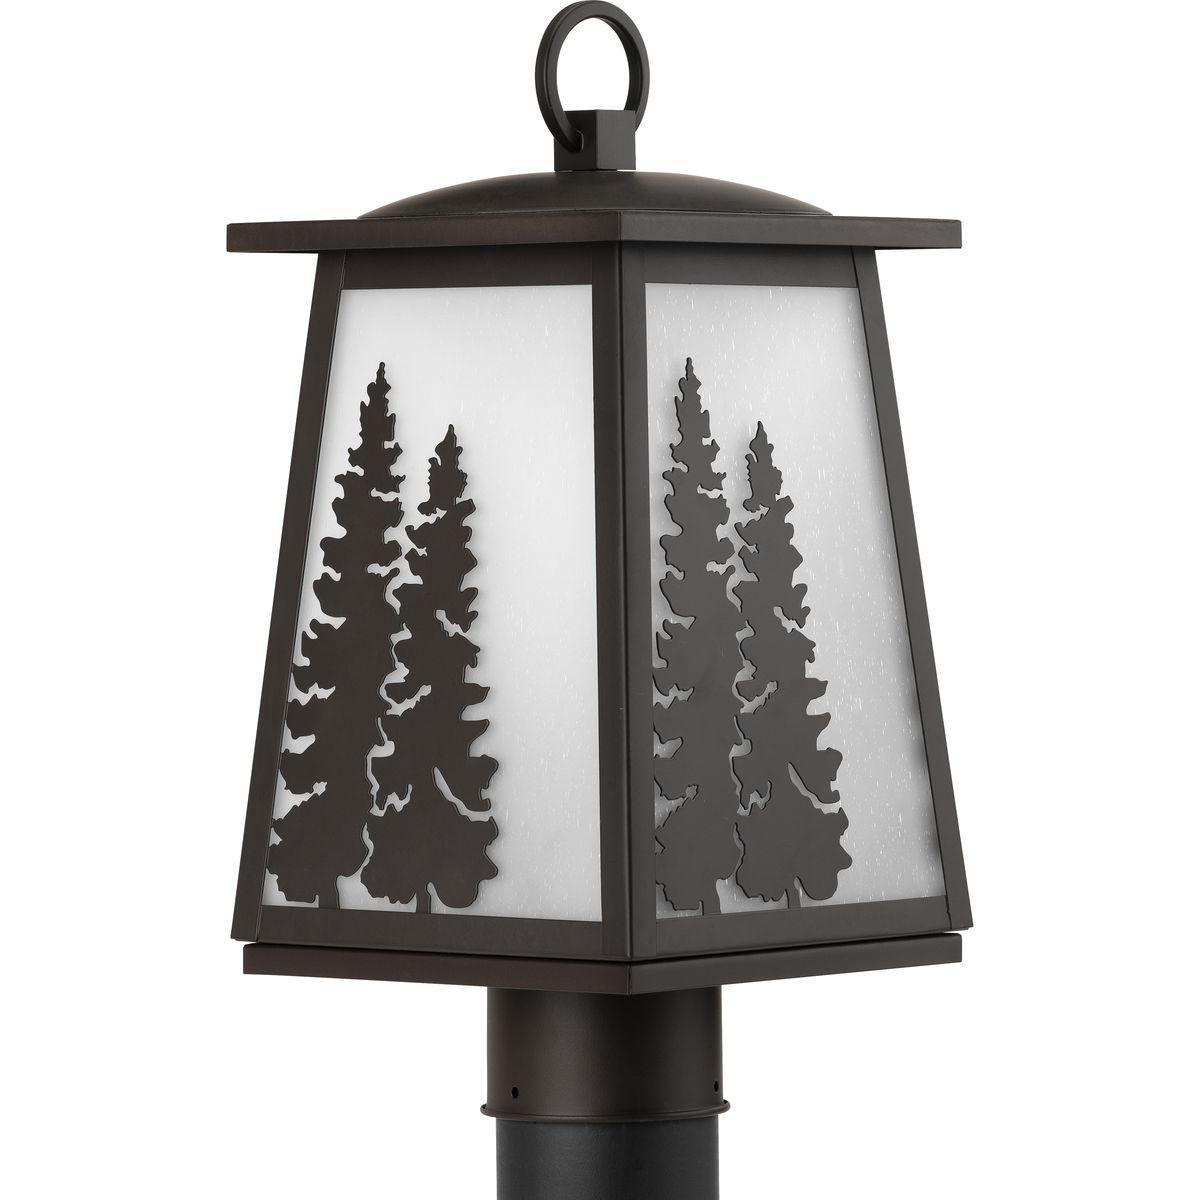 Hubbell P540060-020 Step outside and smell the fresh air without ever venturing far from your home with this post lantern. A handsome antique bronze frame is adorned with intricate, forest-inspired silhouettes that capture the beautiful essence of the wild outdoors. The fram